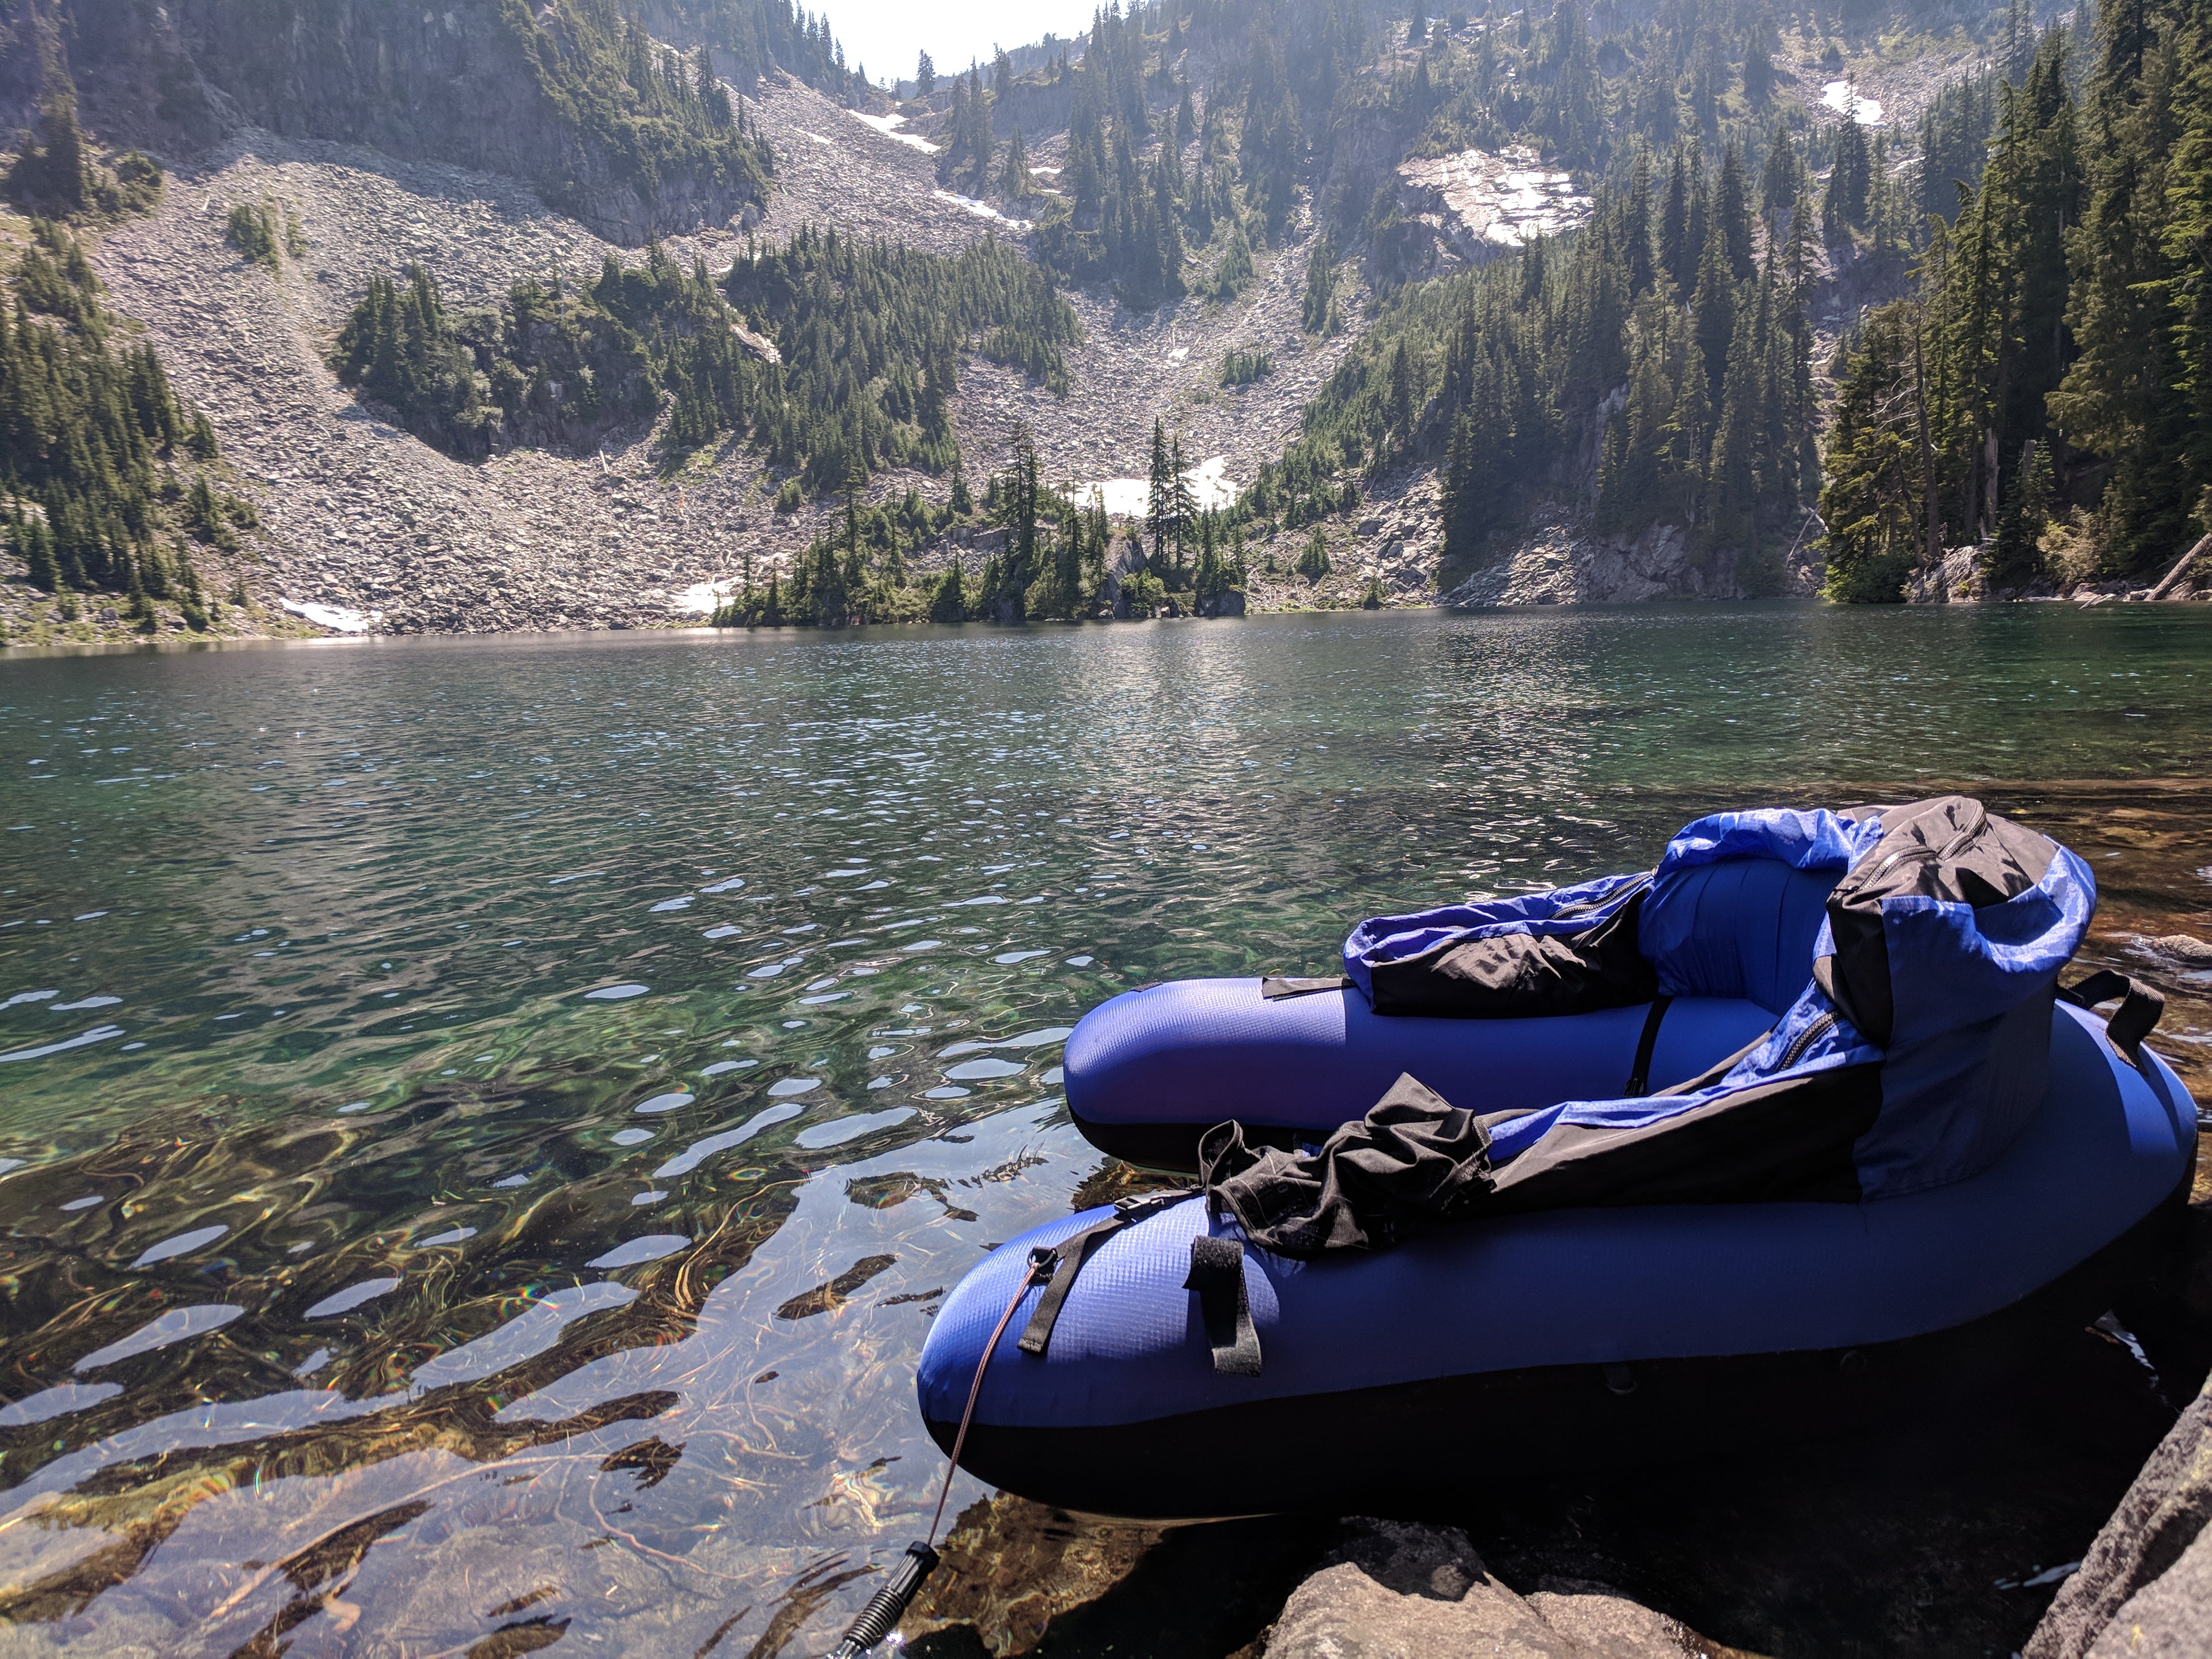 Load video: See the Backpacker Pro Ultralight Float Tube in Action!